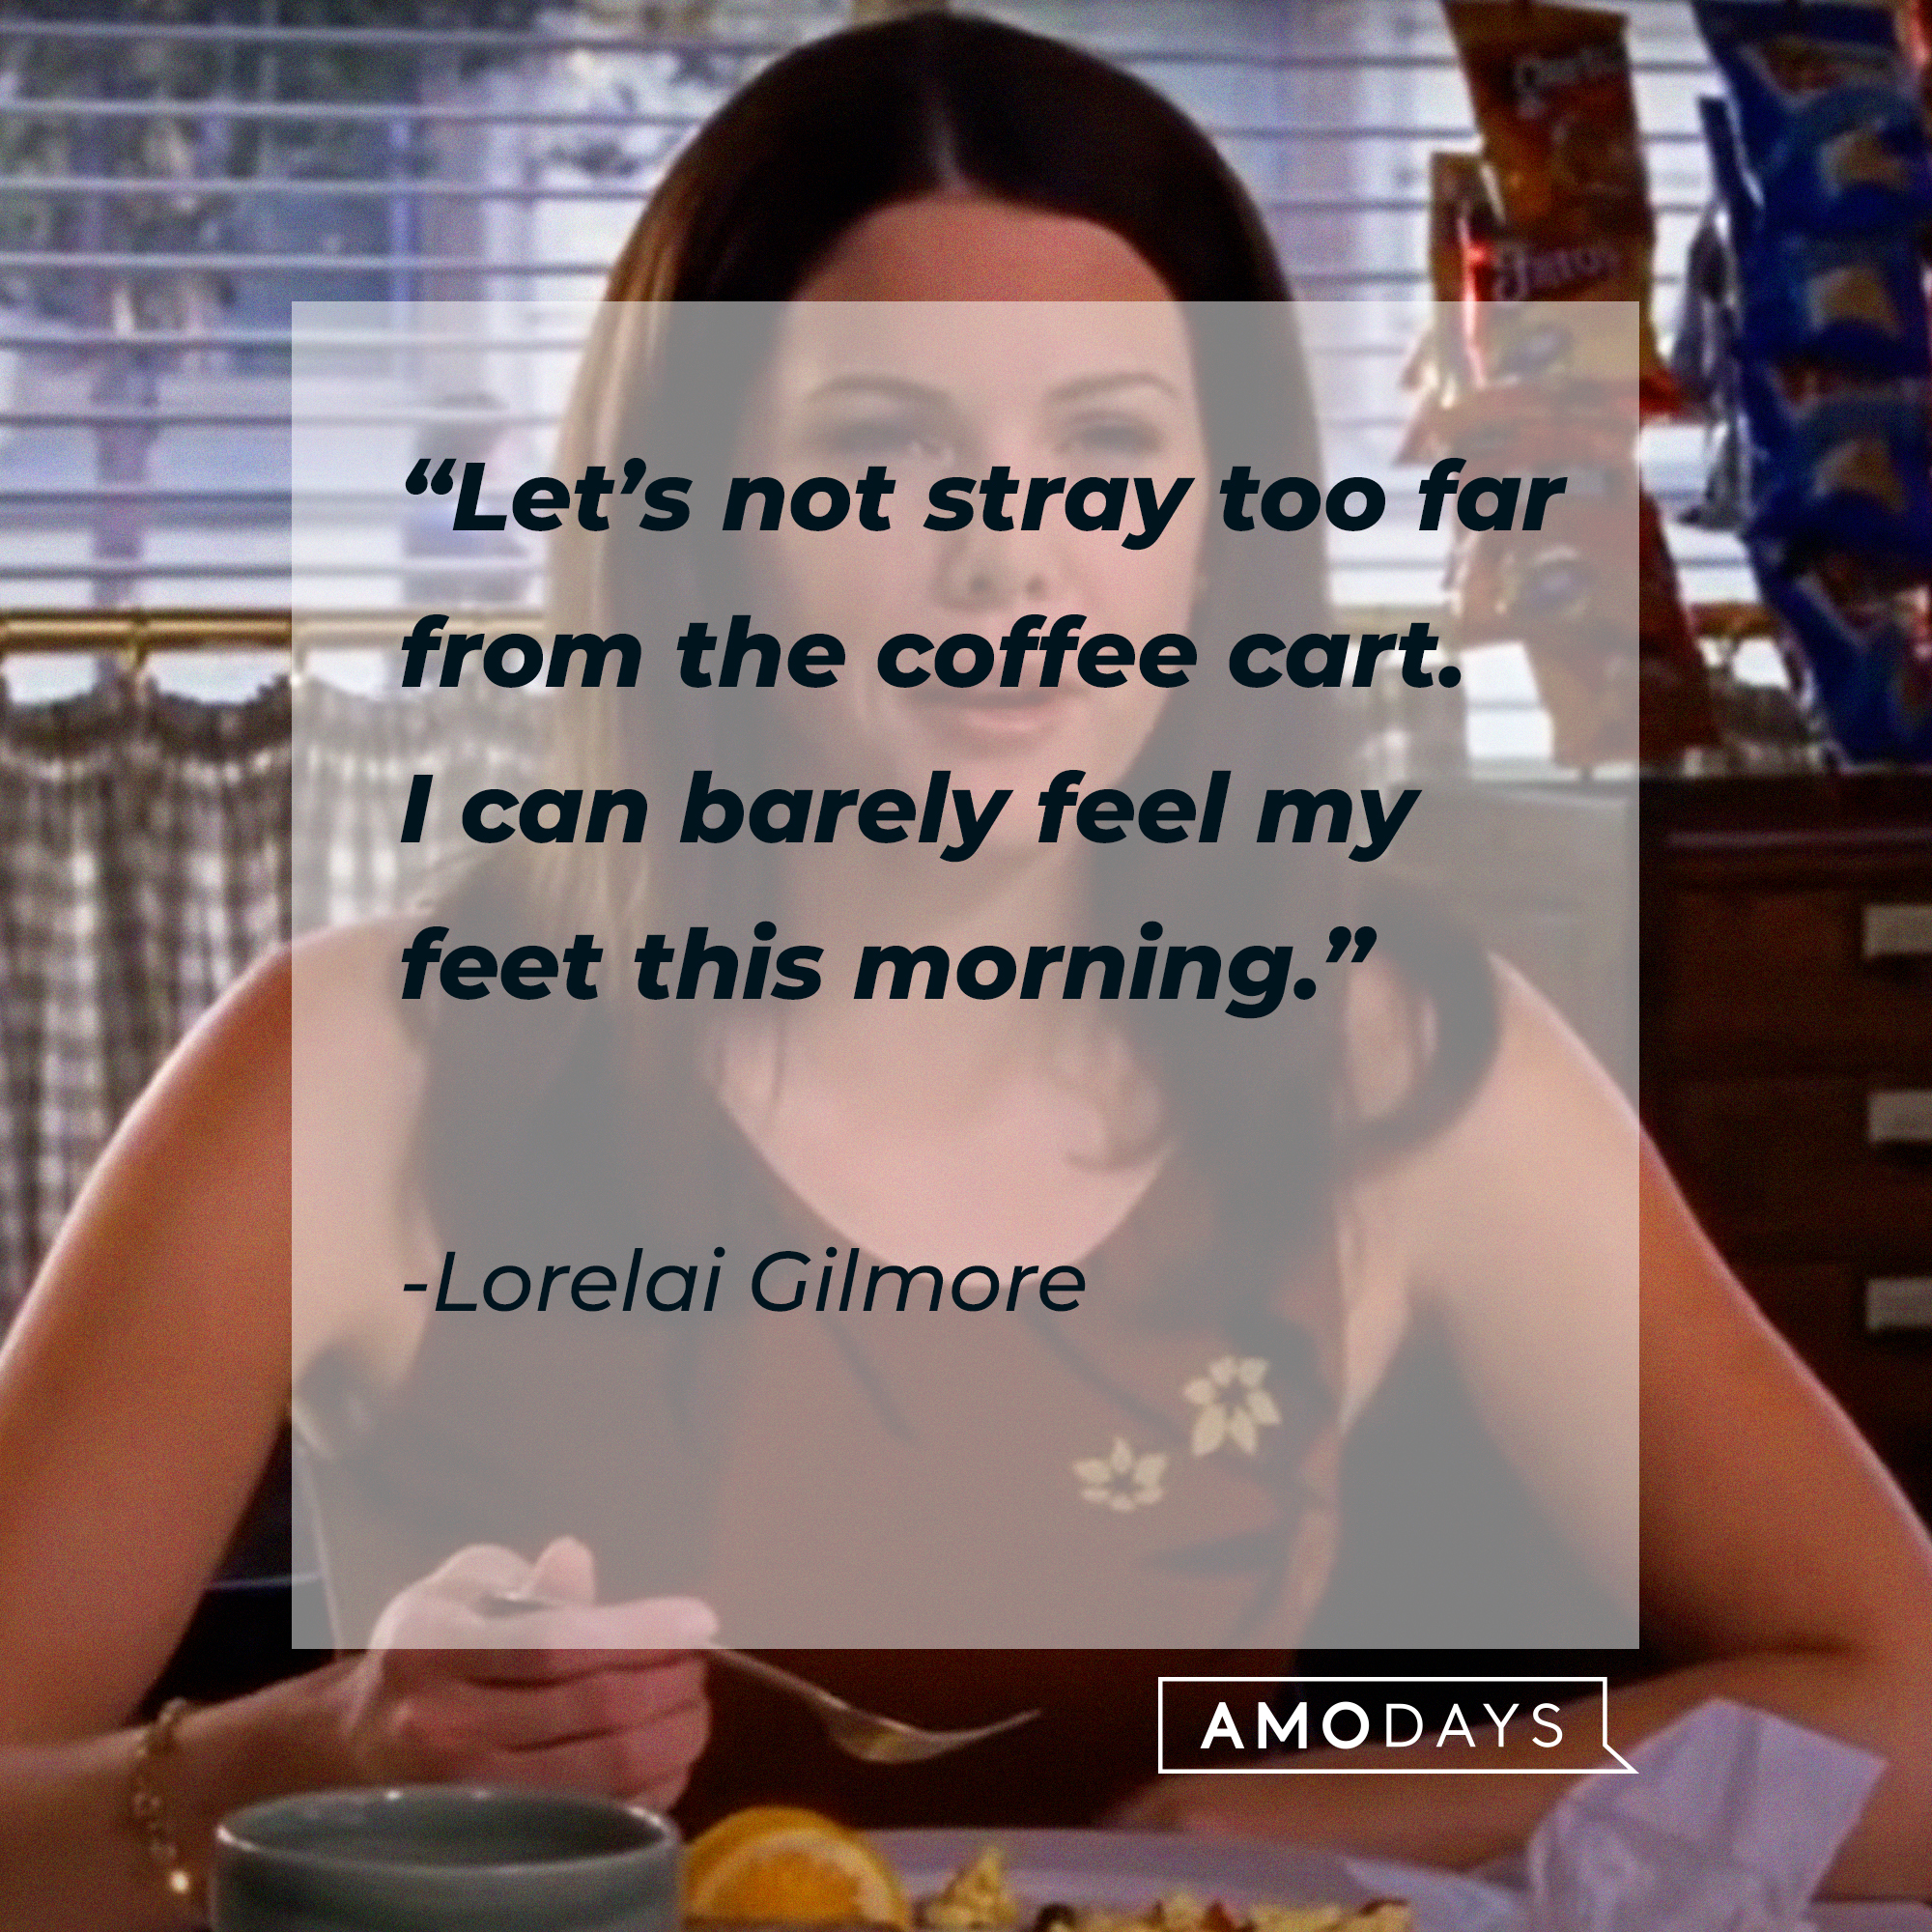 Lorelai Gilmore's quote: “Let’s not stray too far from the coffee cart. I can barely feel my feet this morning.” | Source: facebook.com/GilmoreGirls